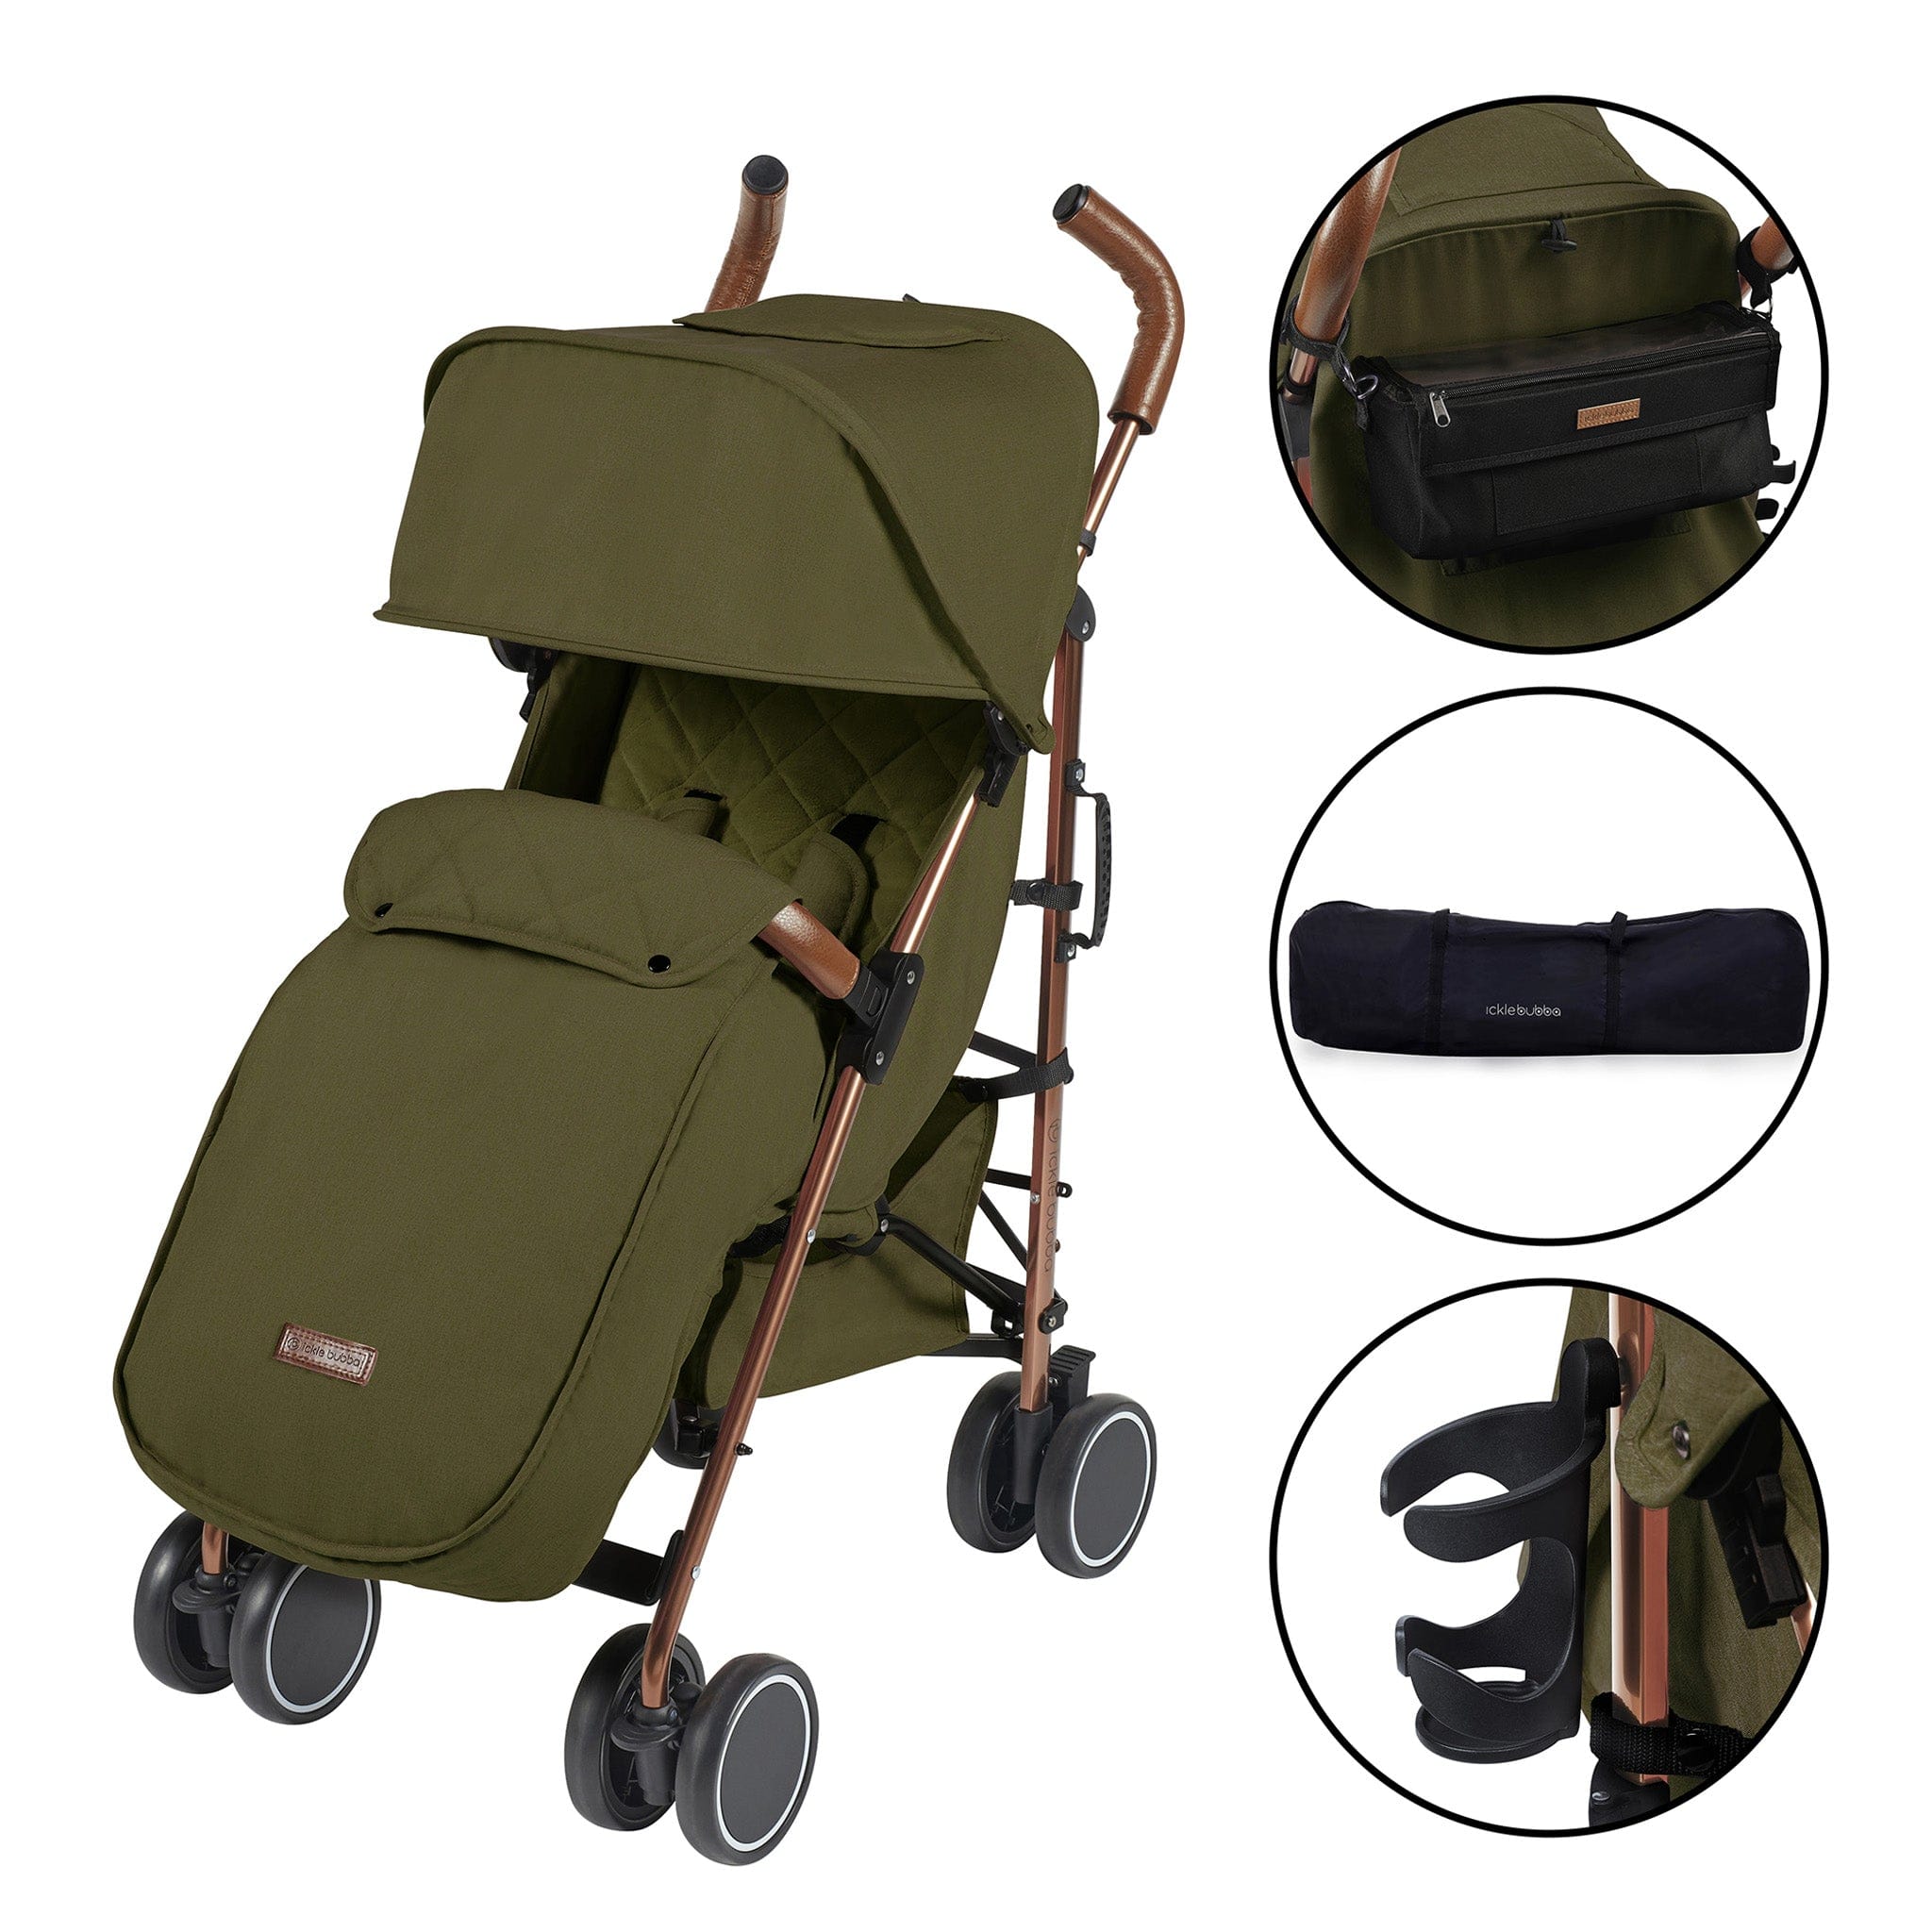 Ickle Bubba baby pushchairs Ickle Bubba Discovery Prime Pushchair Rose Gold/Khaki 15-002-300-045